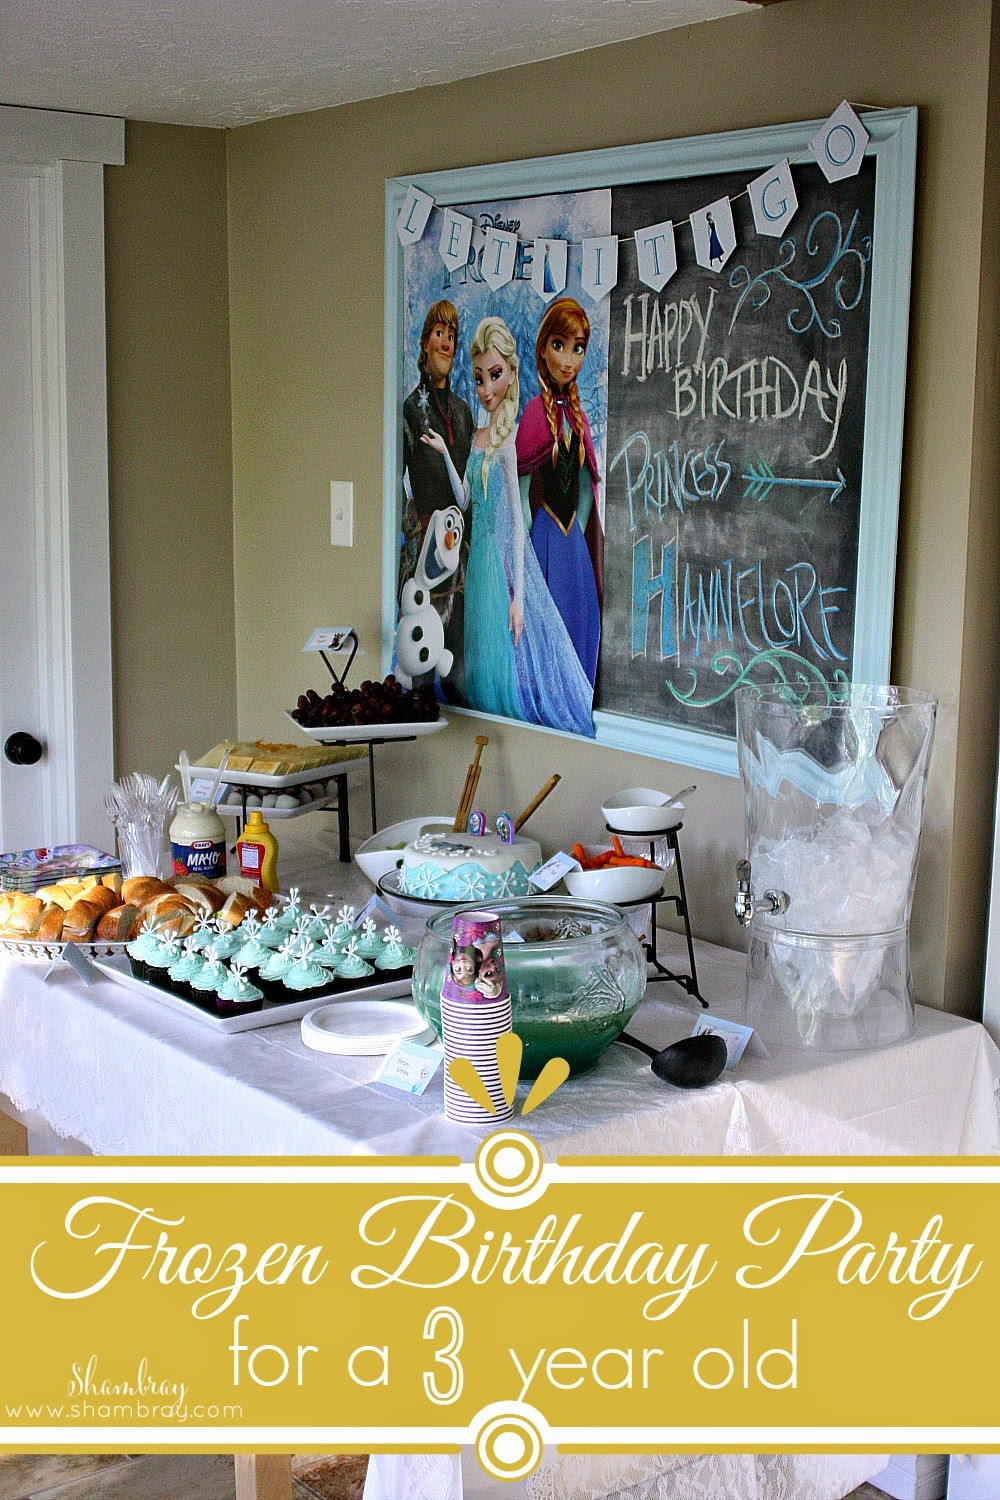 3 Yr Old Birthday Party Food Ideas
 Shambray A Frozen Birthday Party for a 3 year old